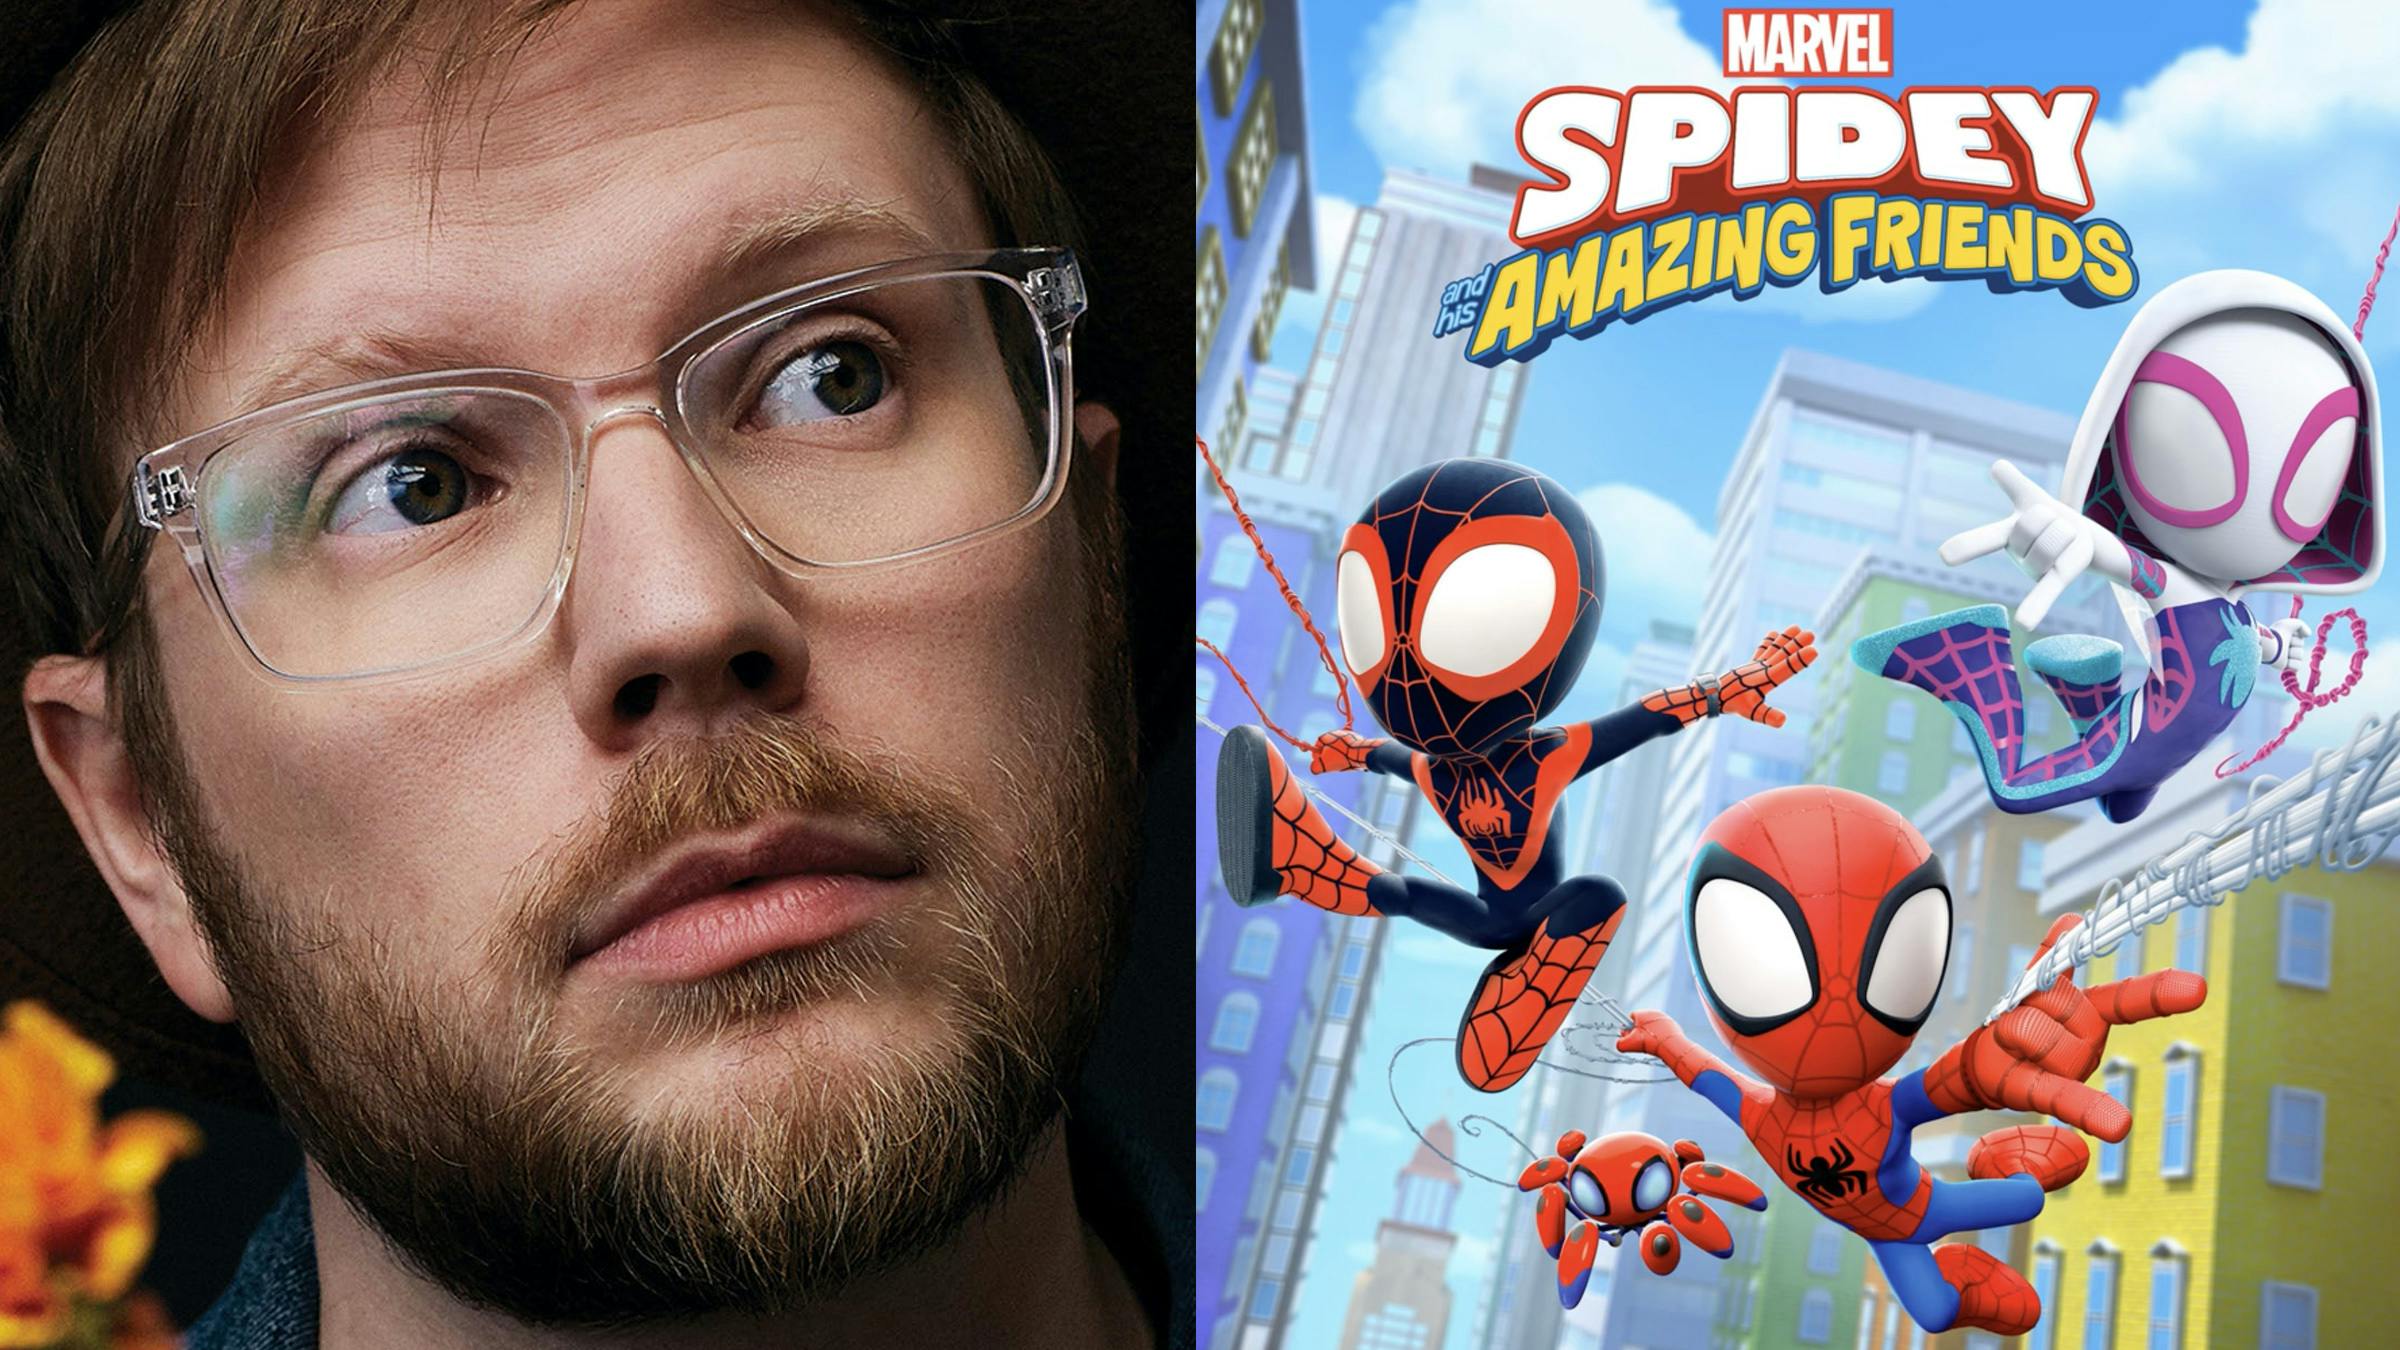 Hear Patrick Stump's theme tune for Spidey And His Amazing Friends